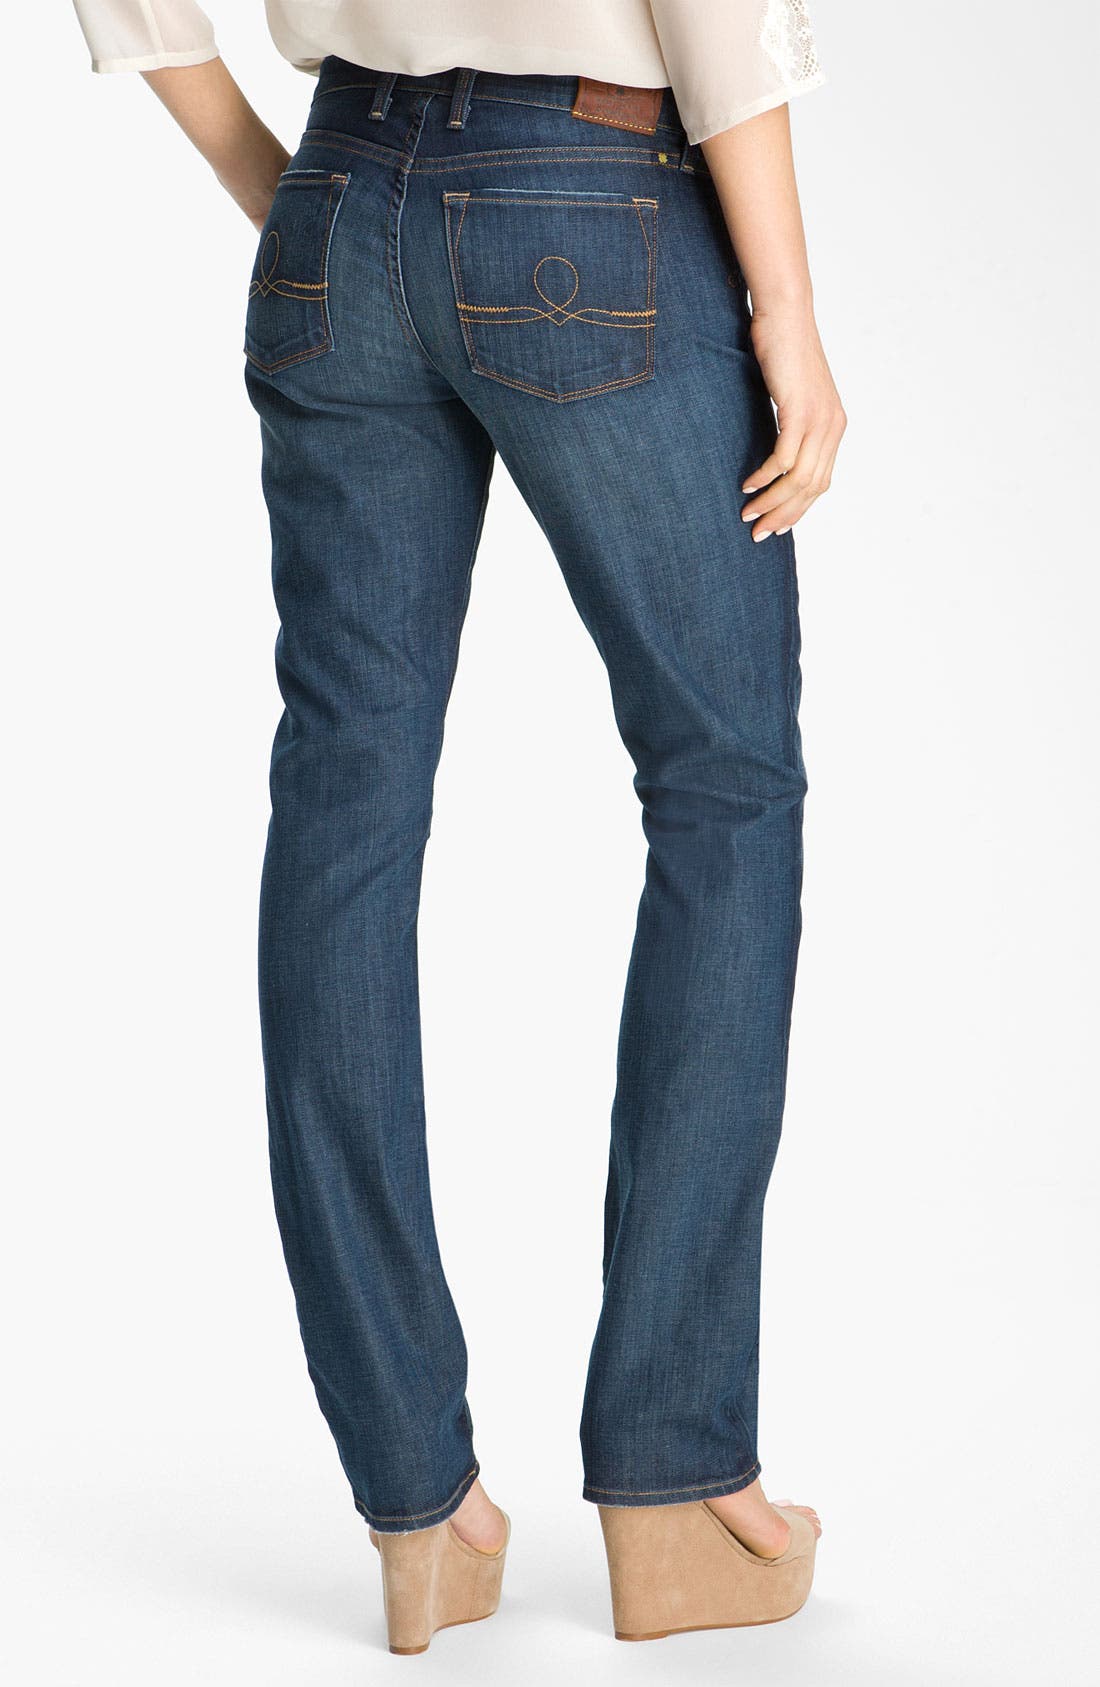 my fit jeans amazon